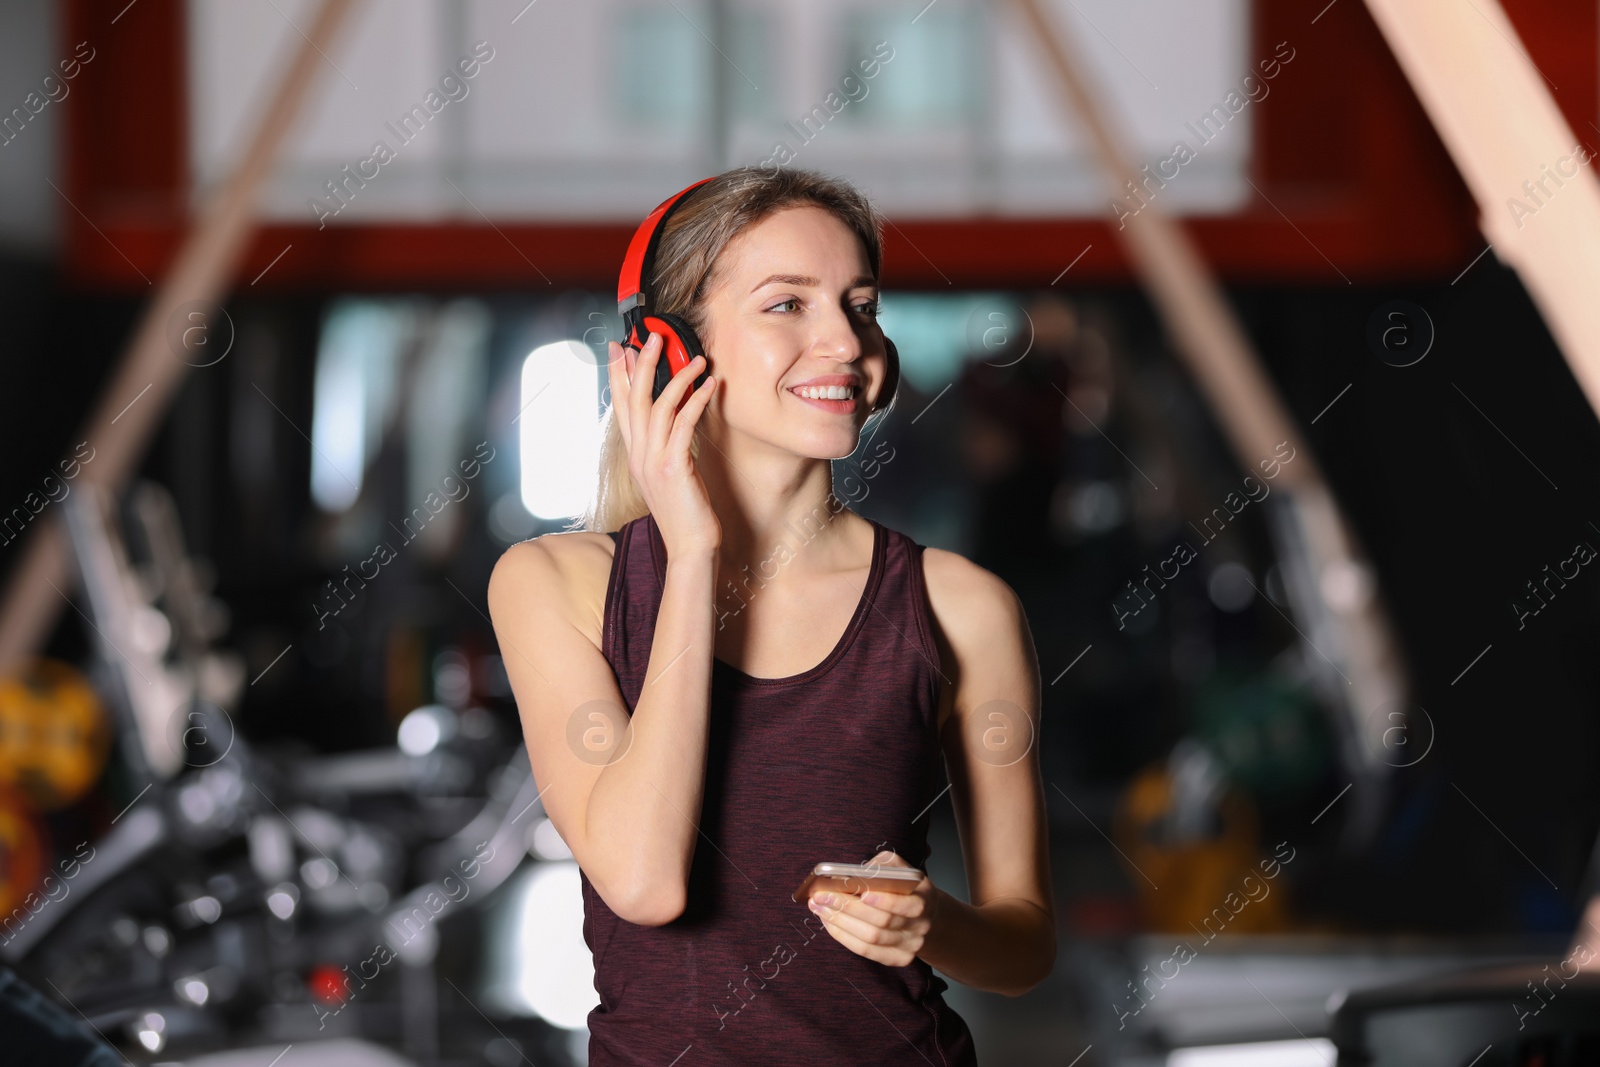 Photo of Young woman with headphones listening to music on mobile device at gym